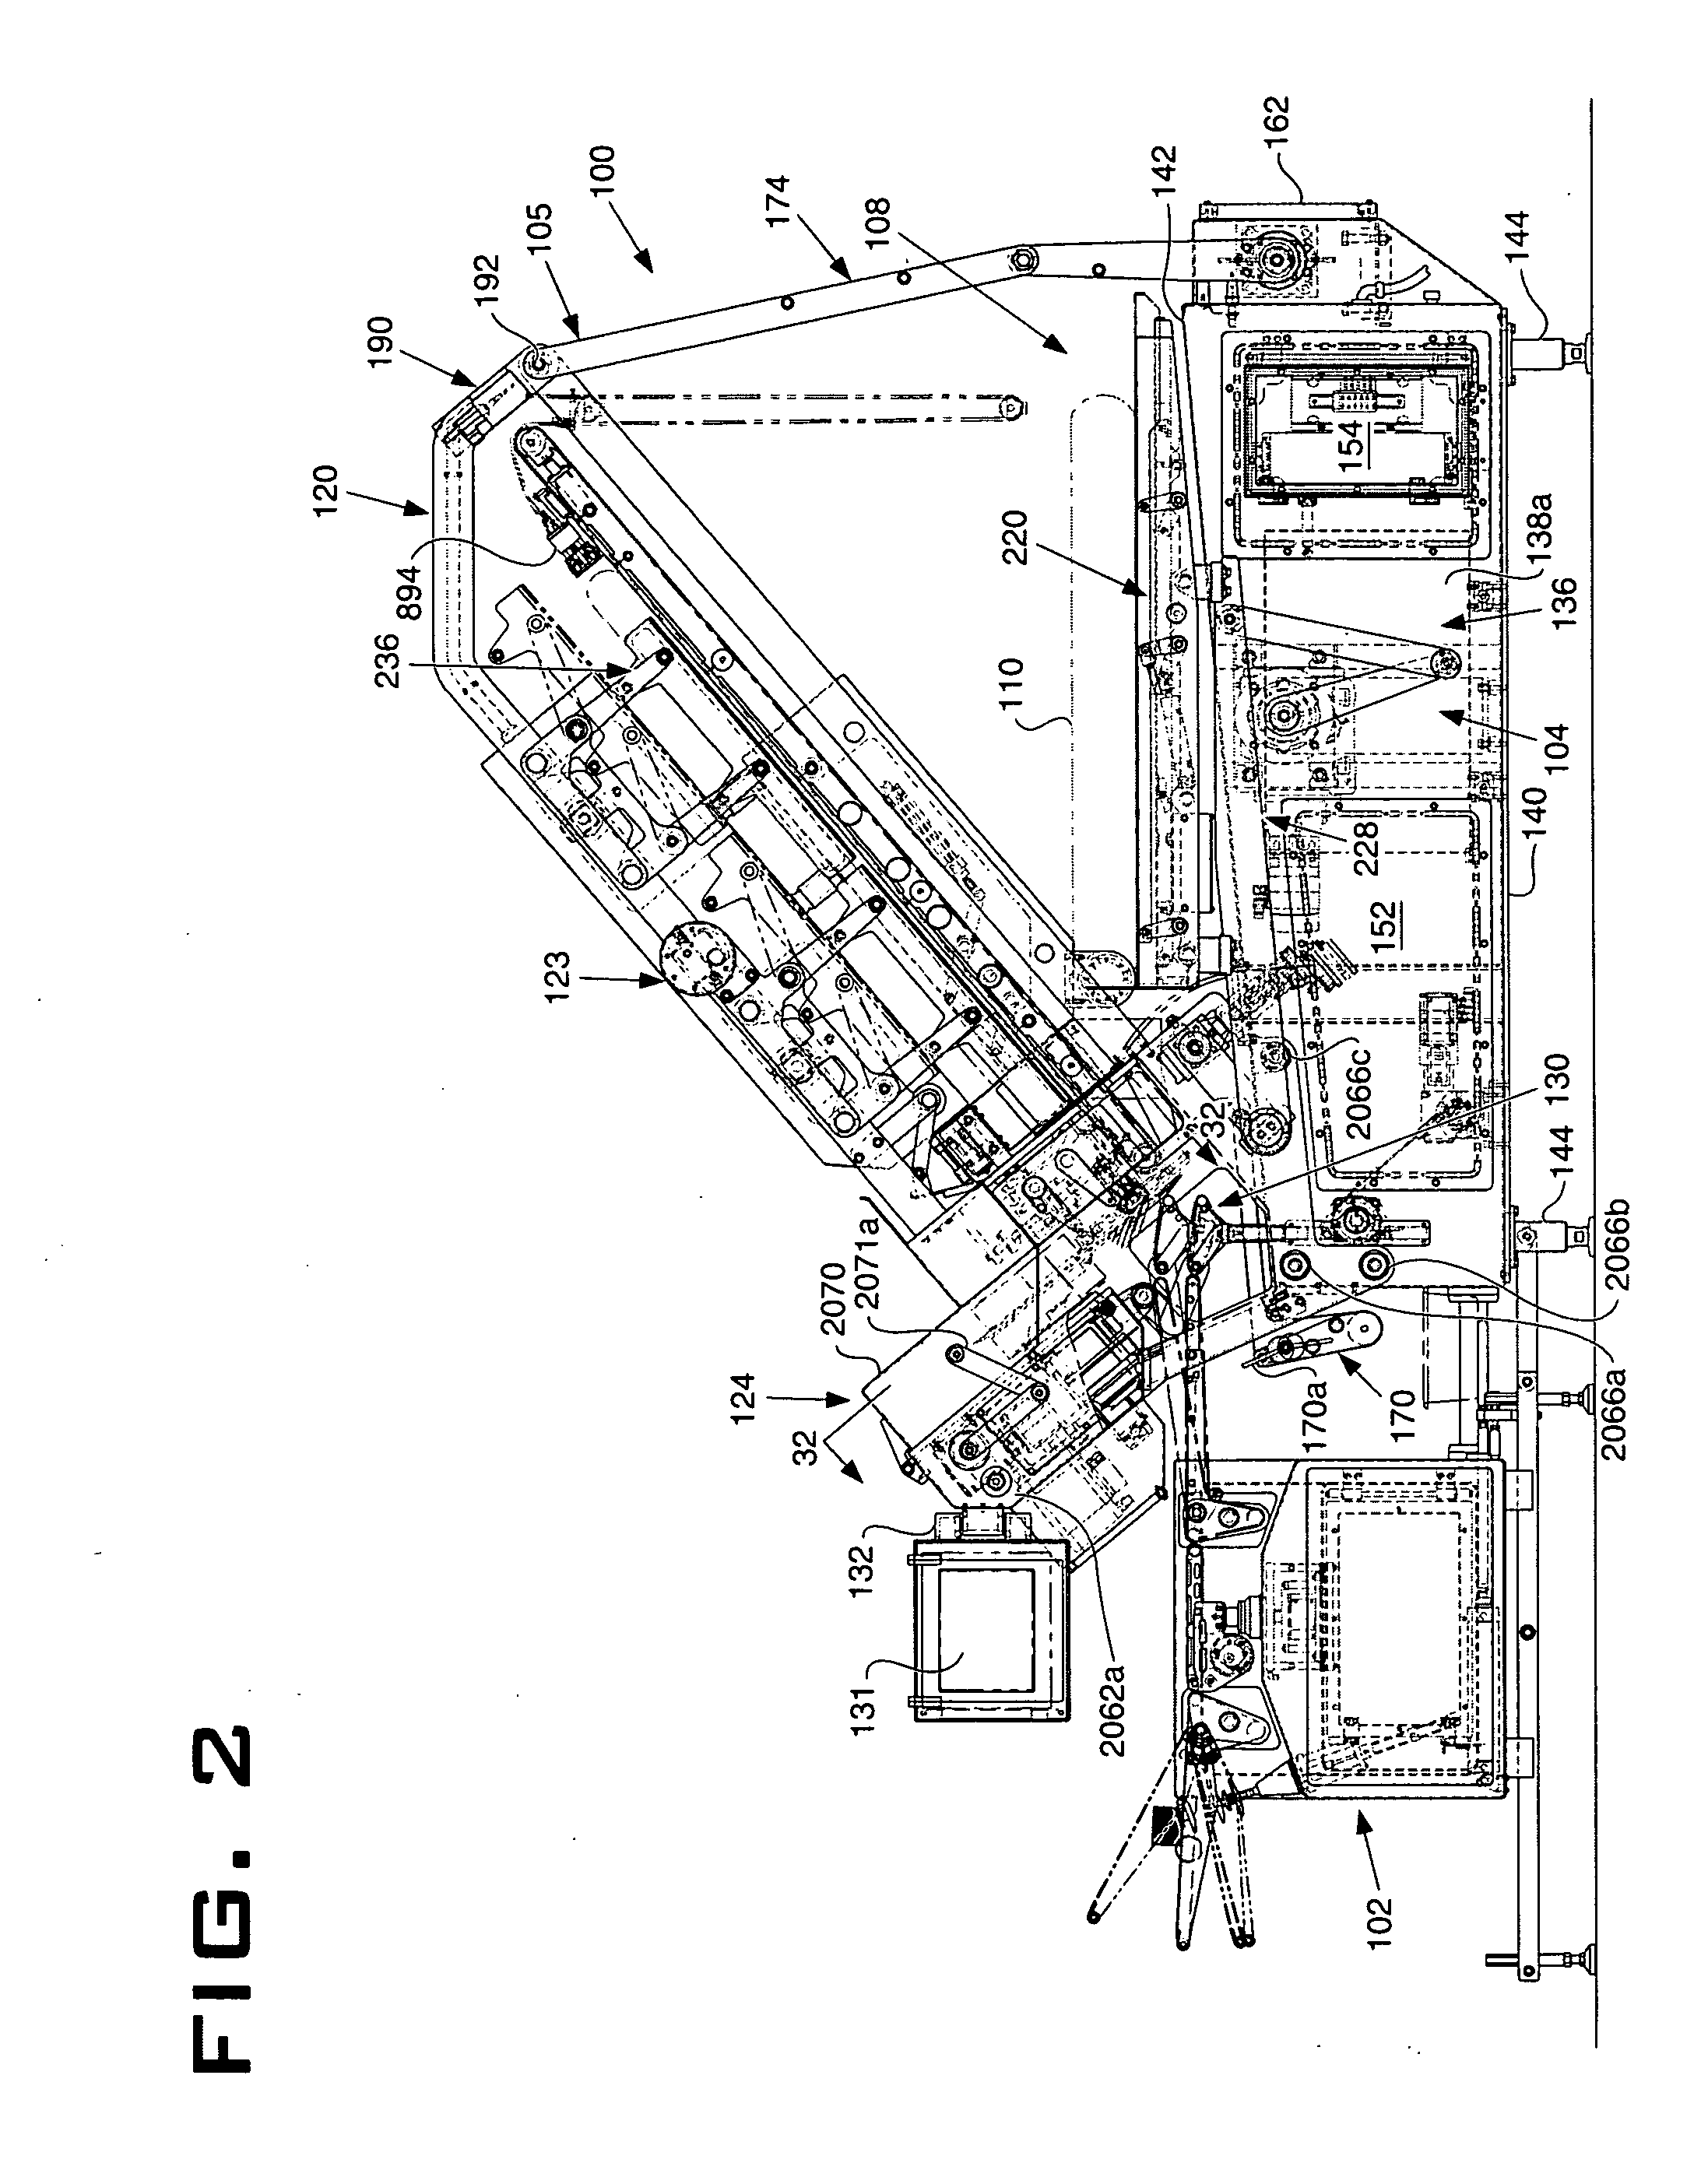 Food Article Loading Mechanism for a Food Article Slicing Machine